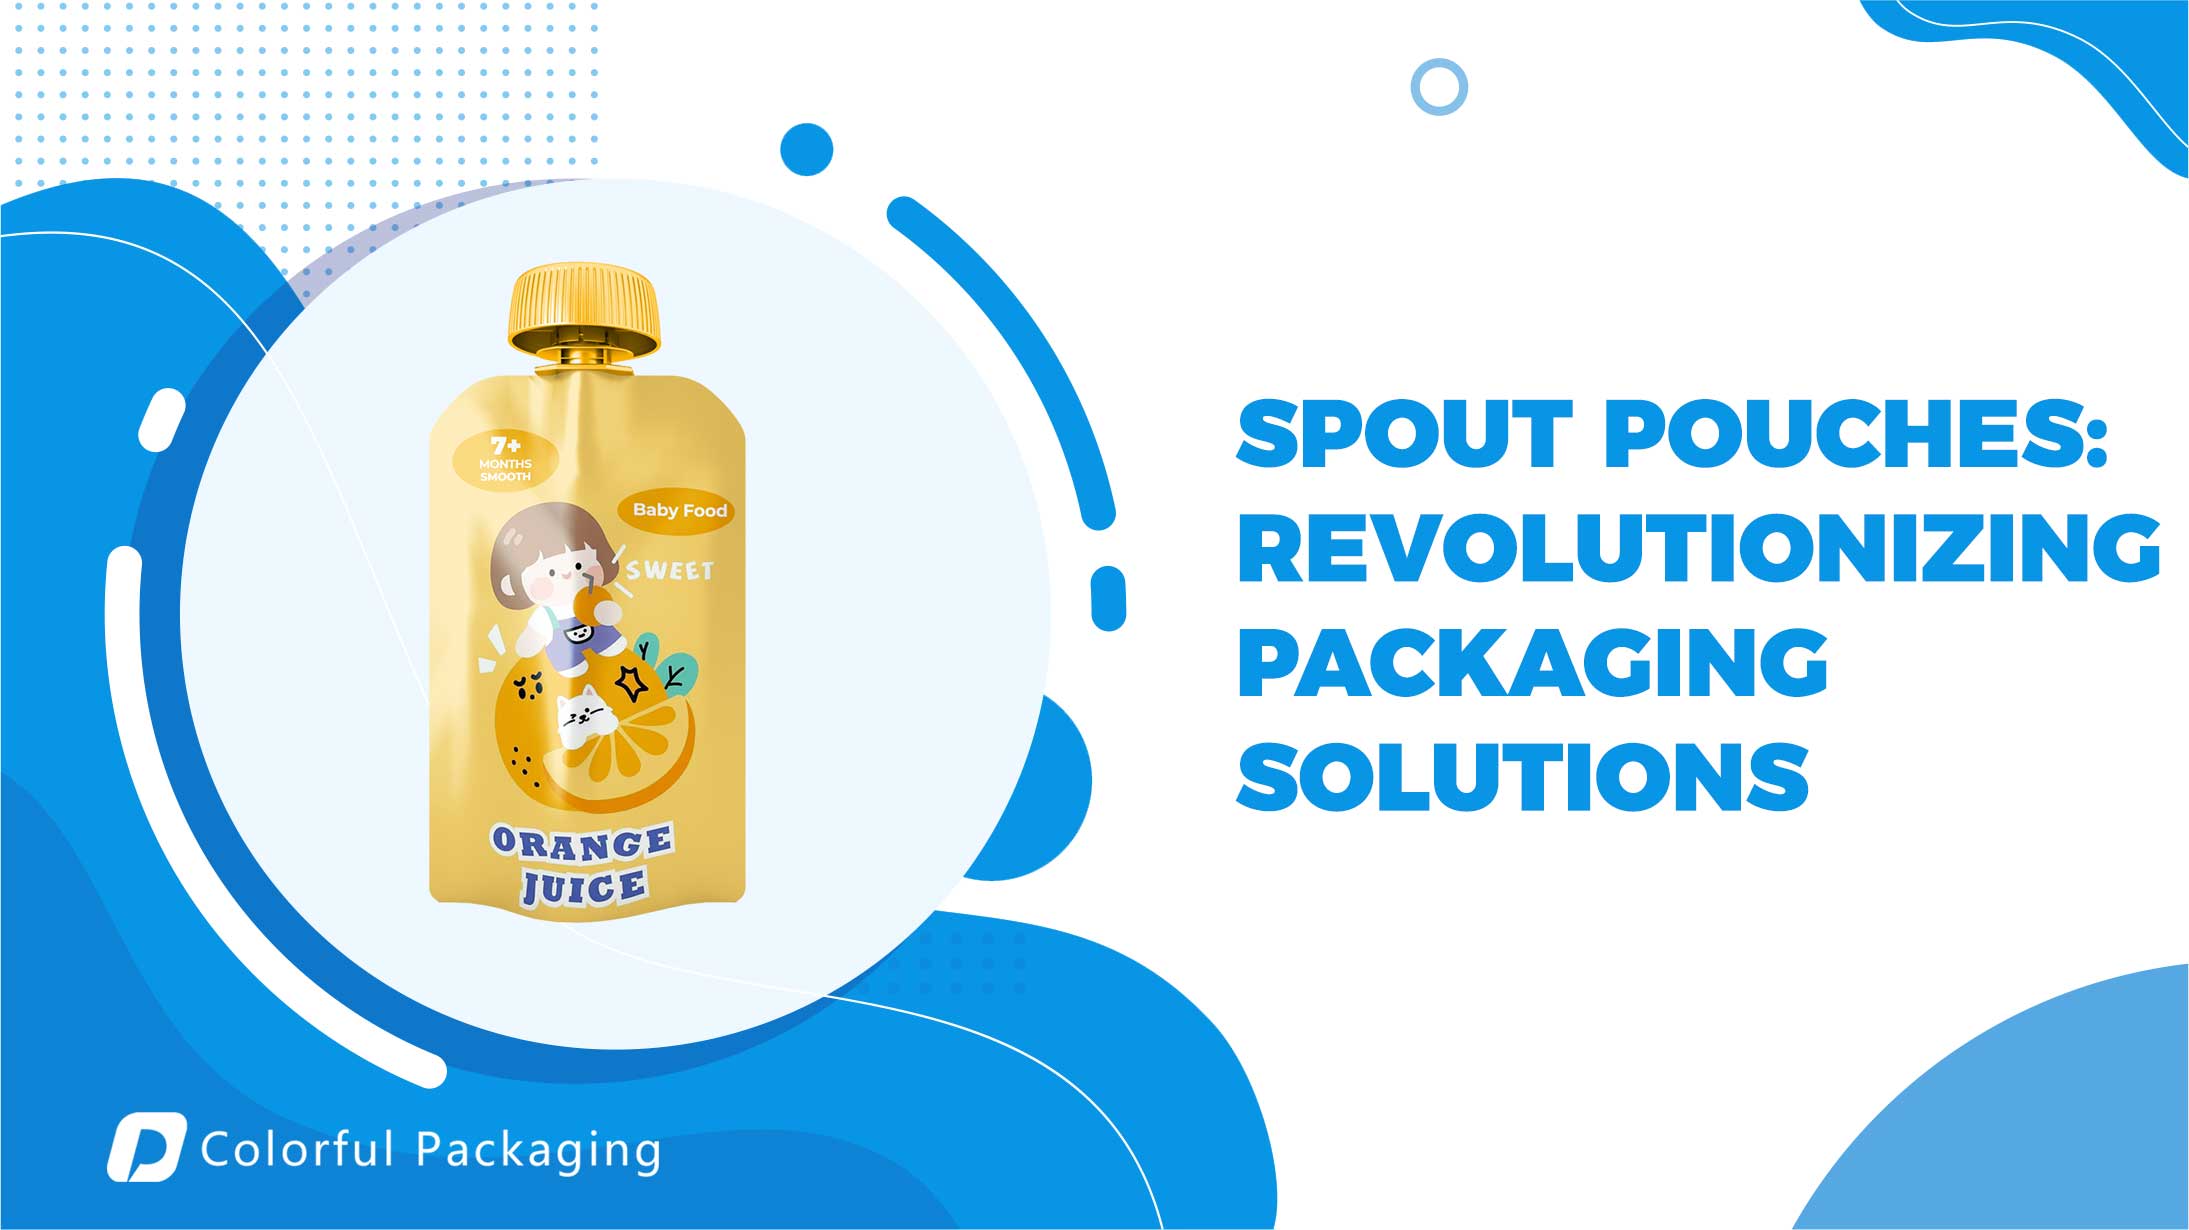 Spout Pouches: Revolutionizing Packaging Solutions